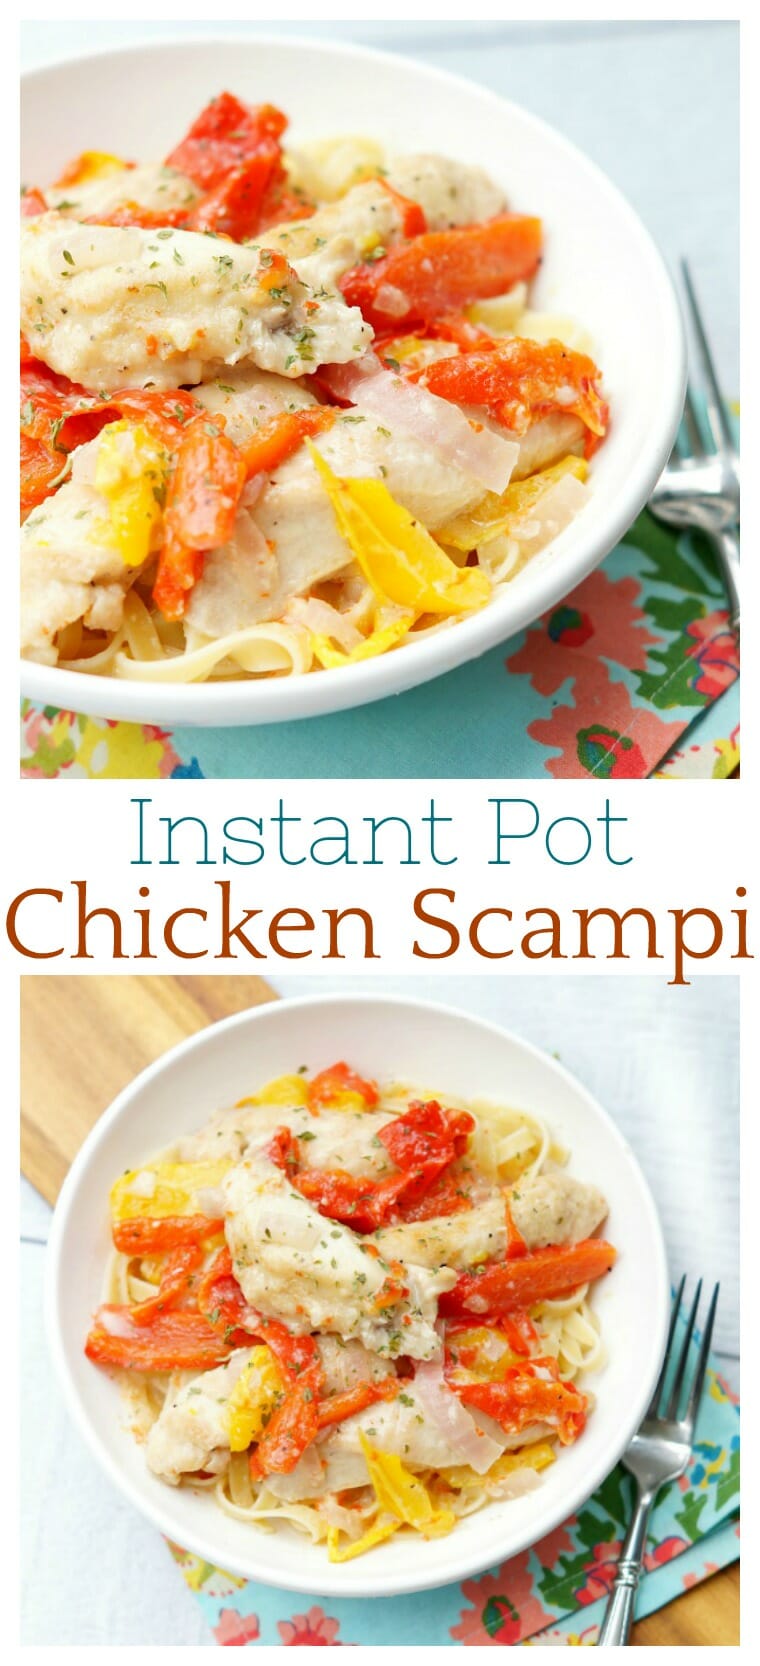 Instant Pot Chicken Scampi, a delicious and quick chicken recipe made in the Instant Pot